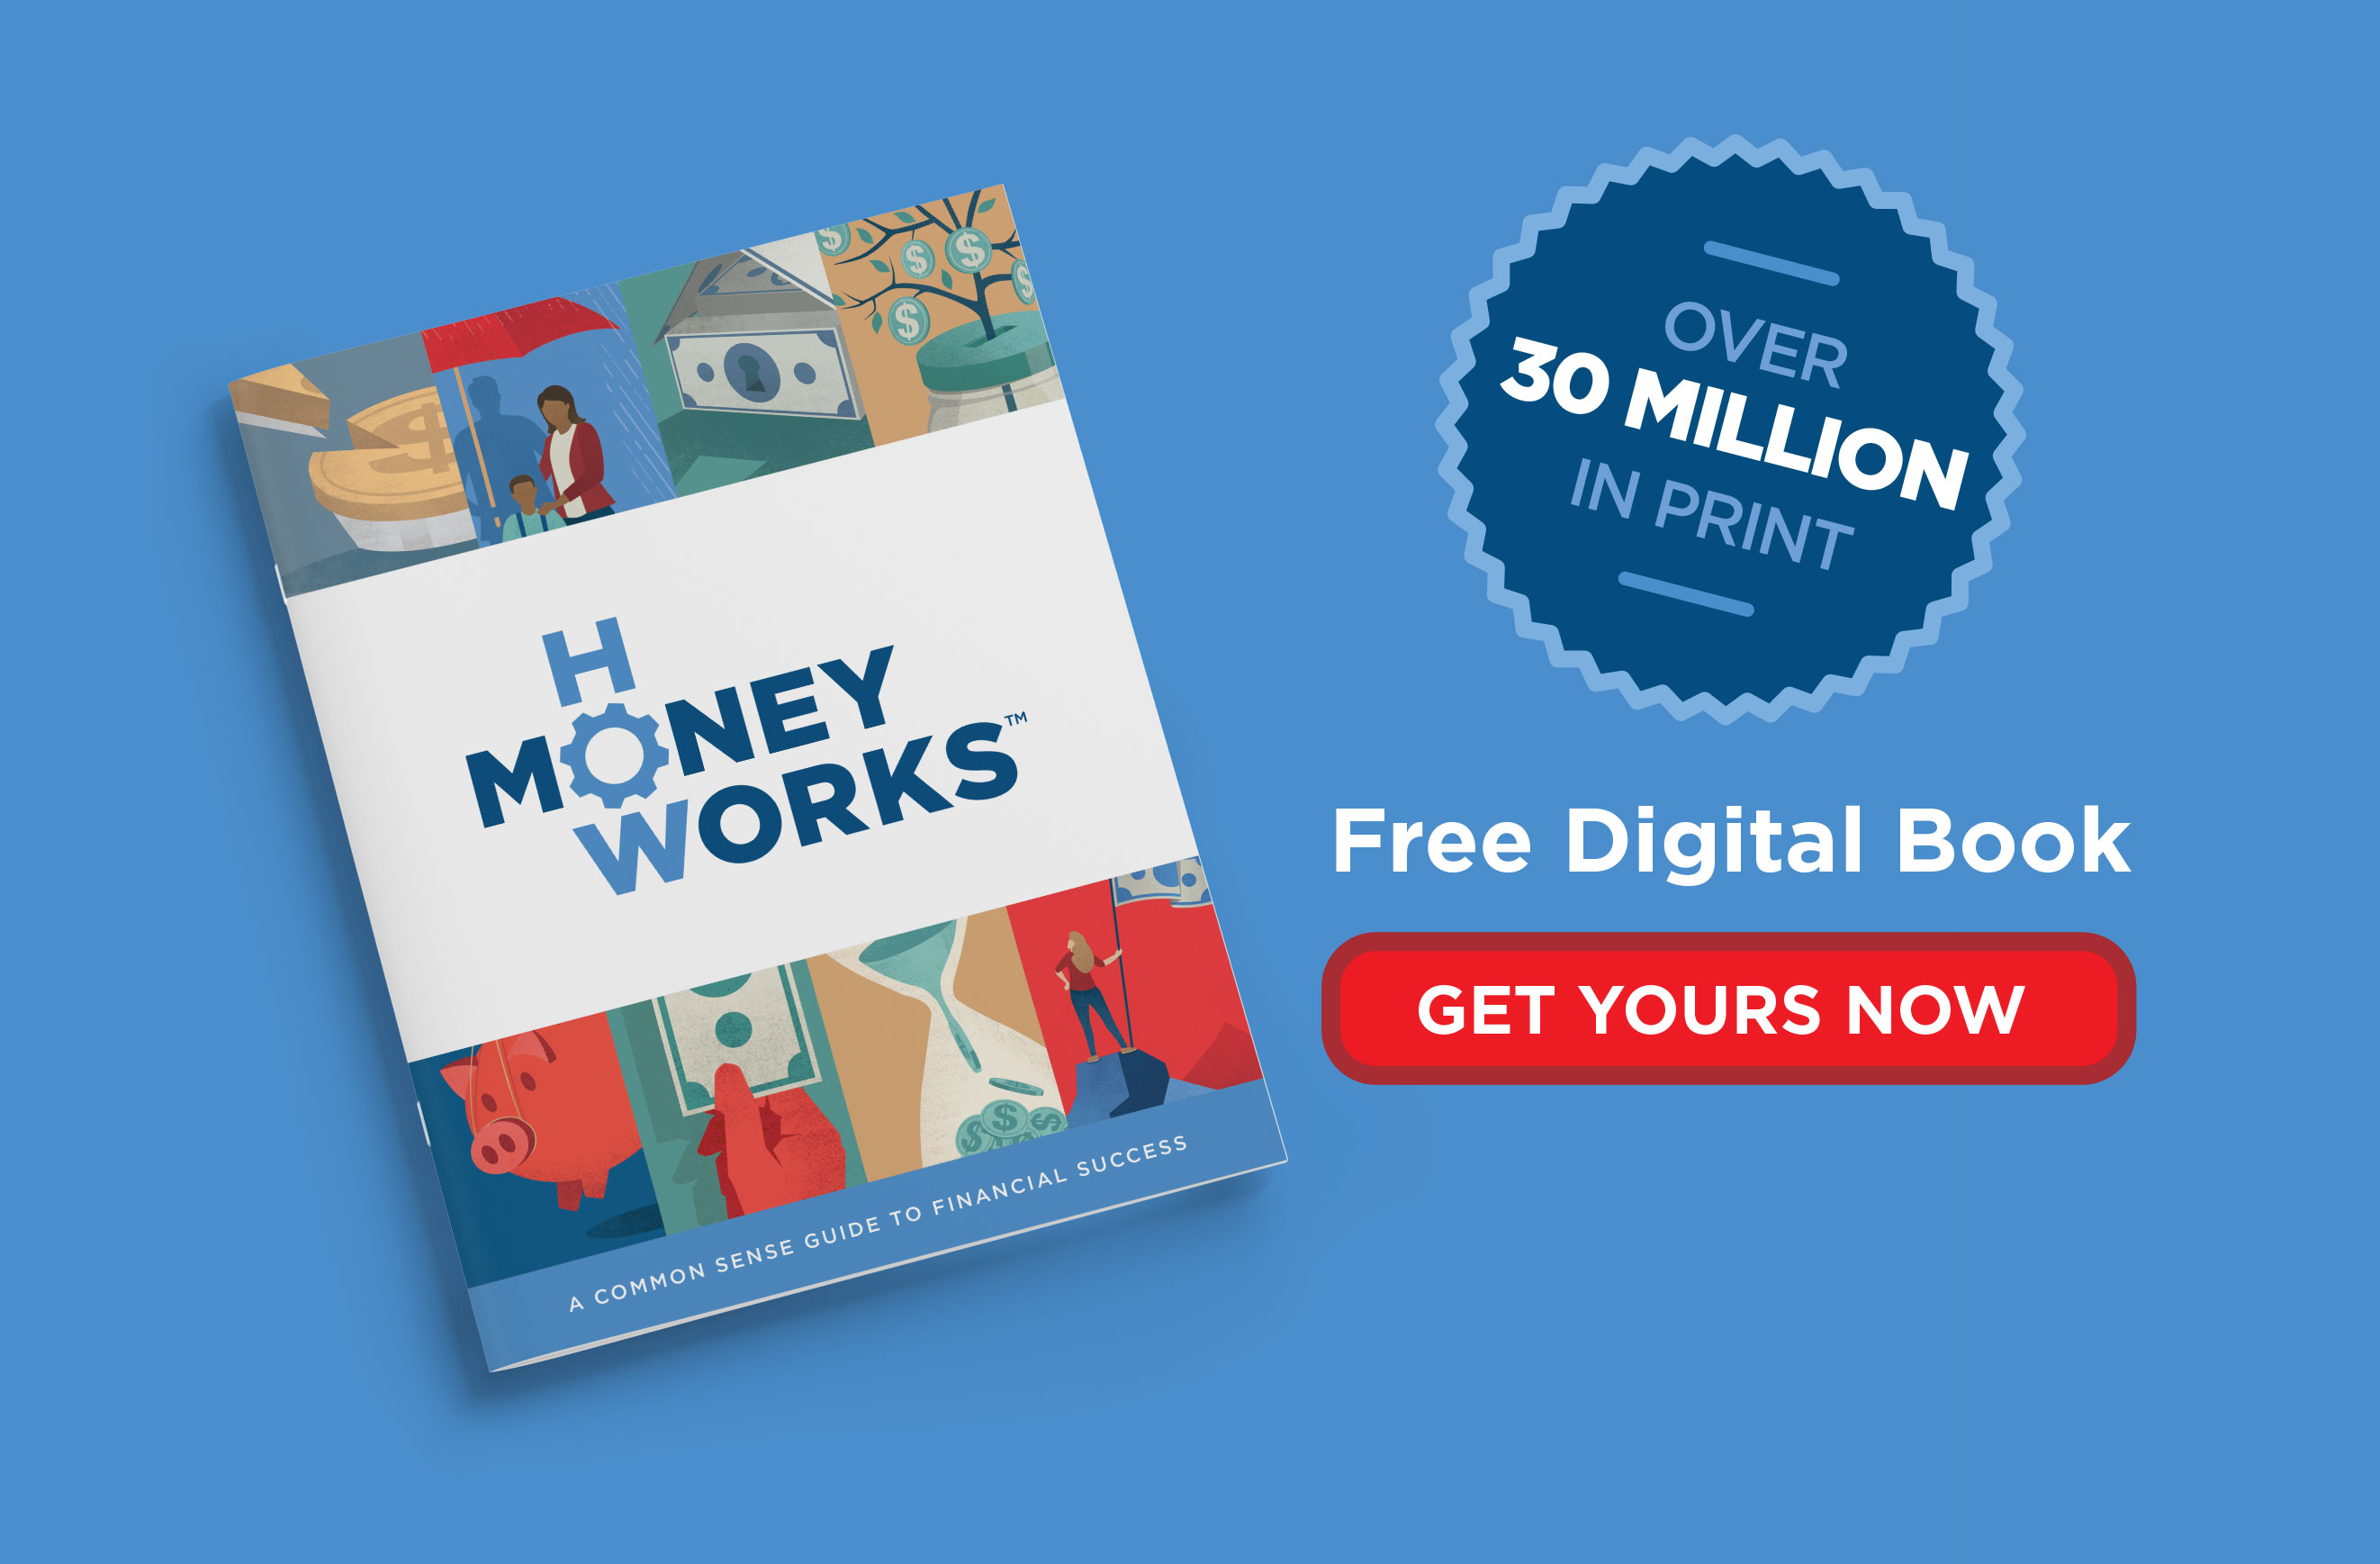 How Money Works™ - Over 30 million in print. Free digital book. Get yours now.